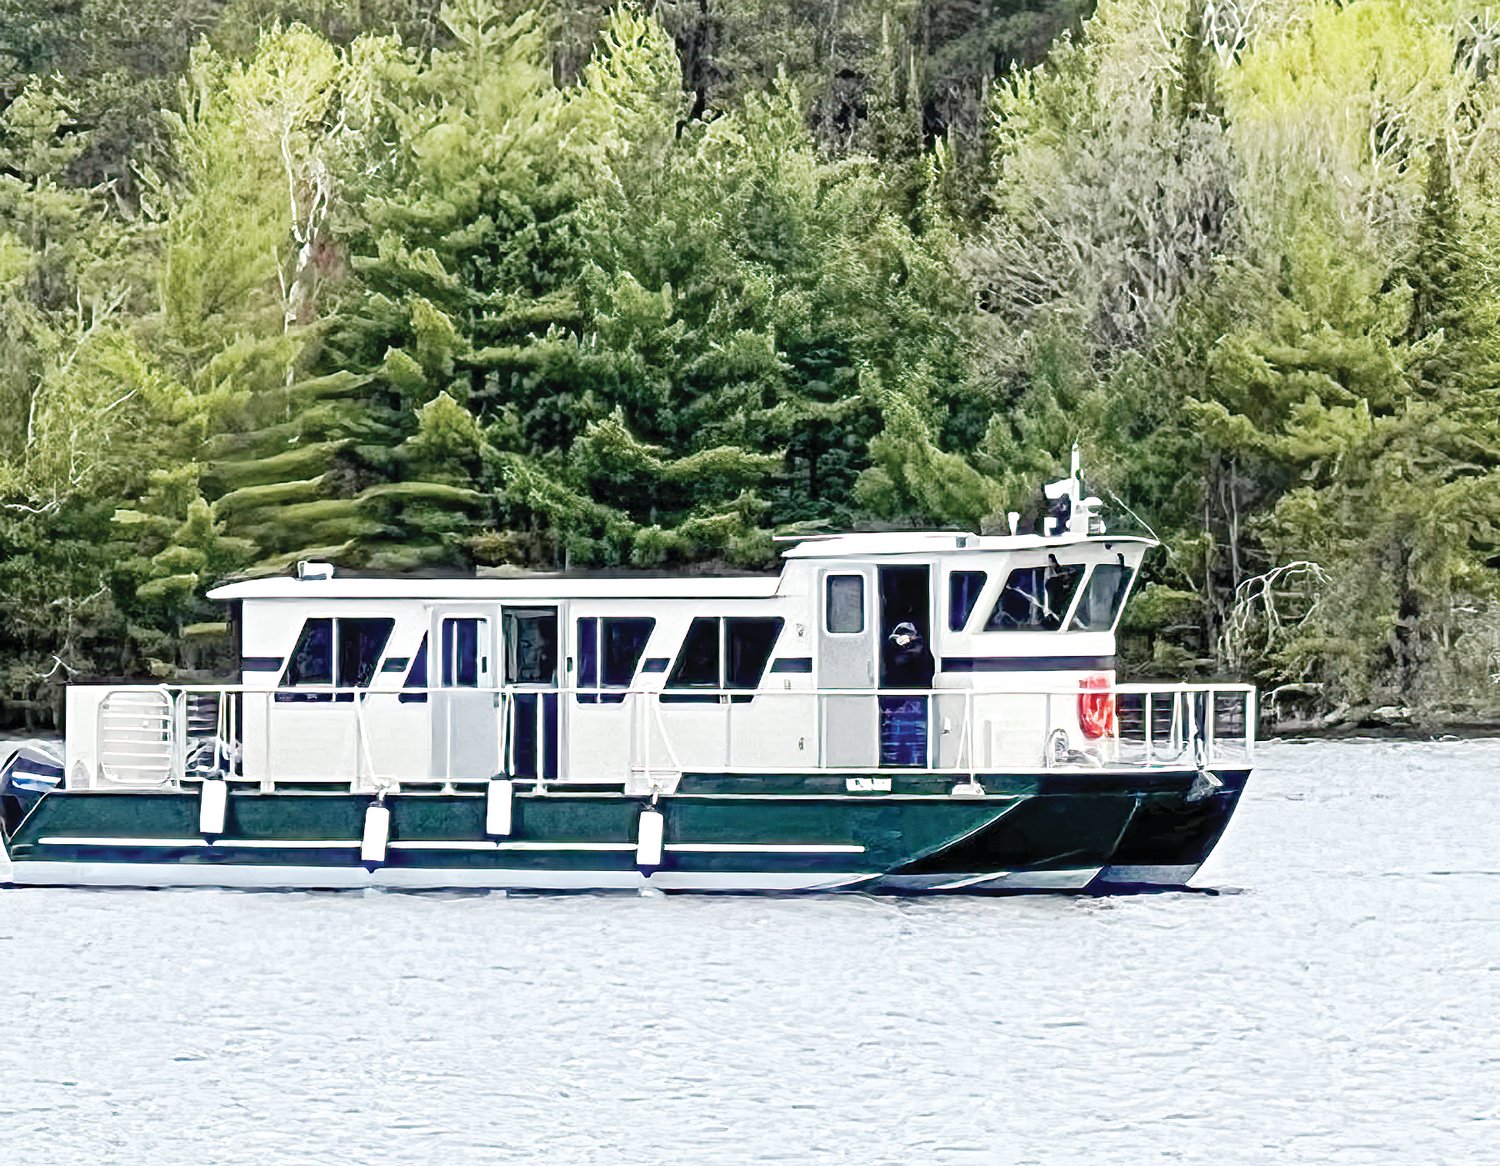 The Ne-zho-dain is the new tour boat at Voyageurs National Park.